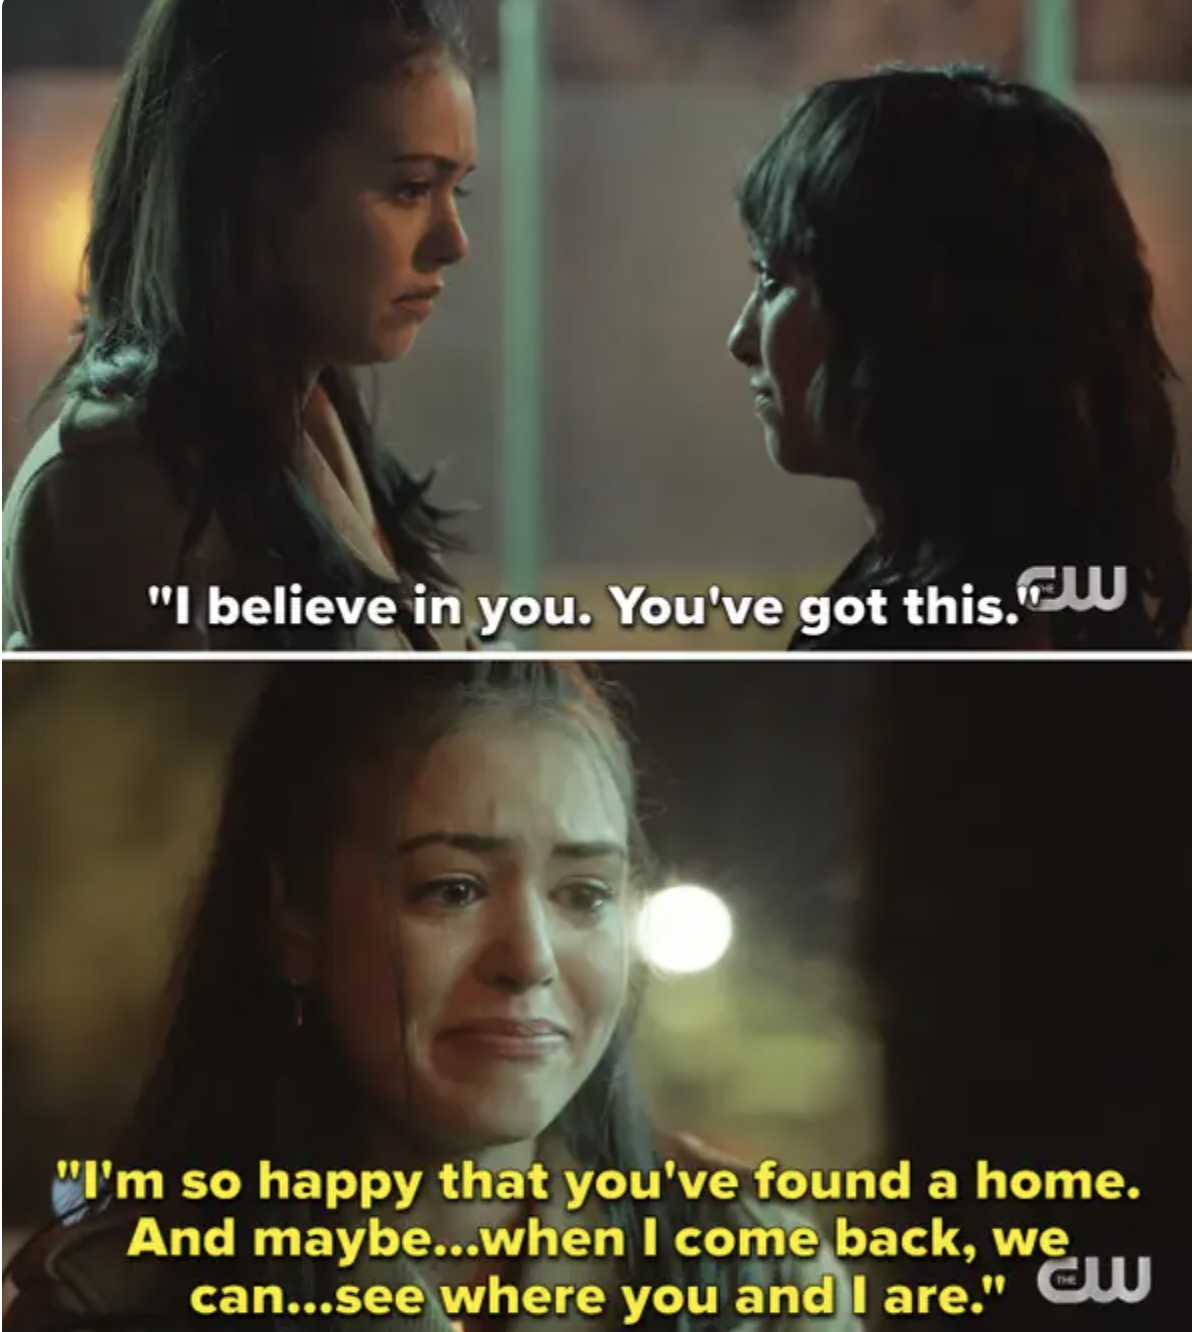 Josie says goodbye to Finch: &quot;Maybe when I come back we can see where you and I are&quot;